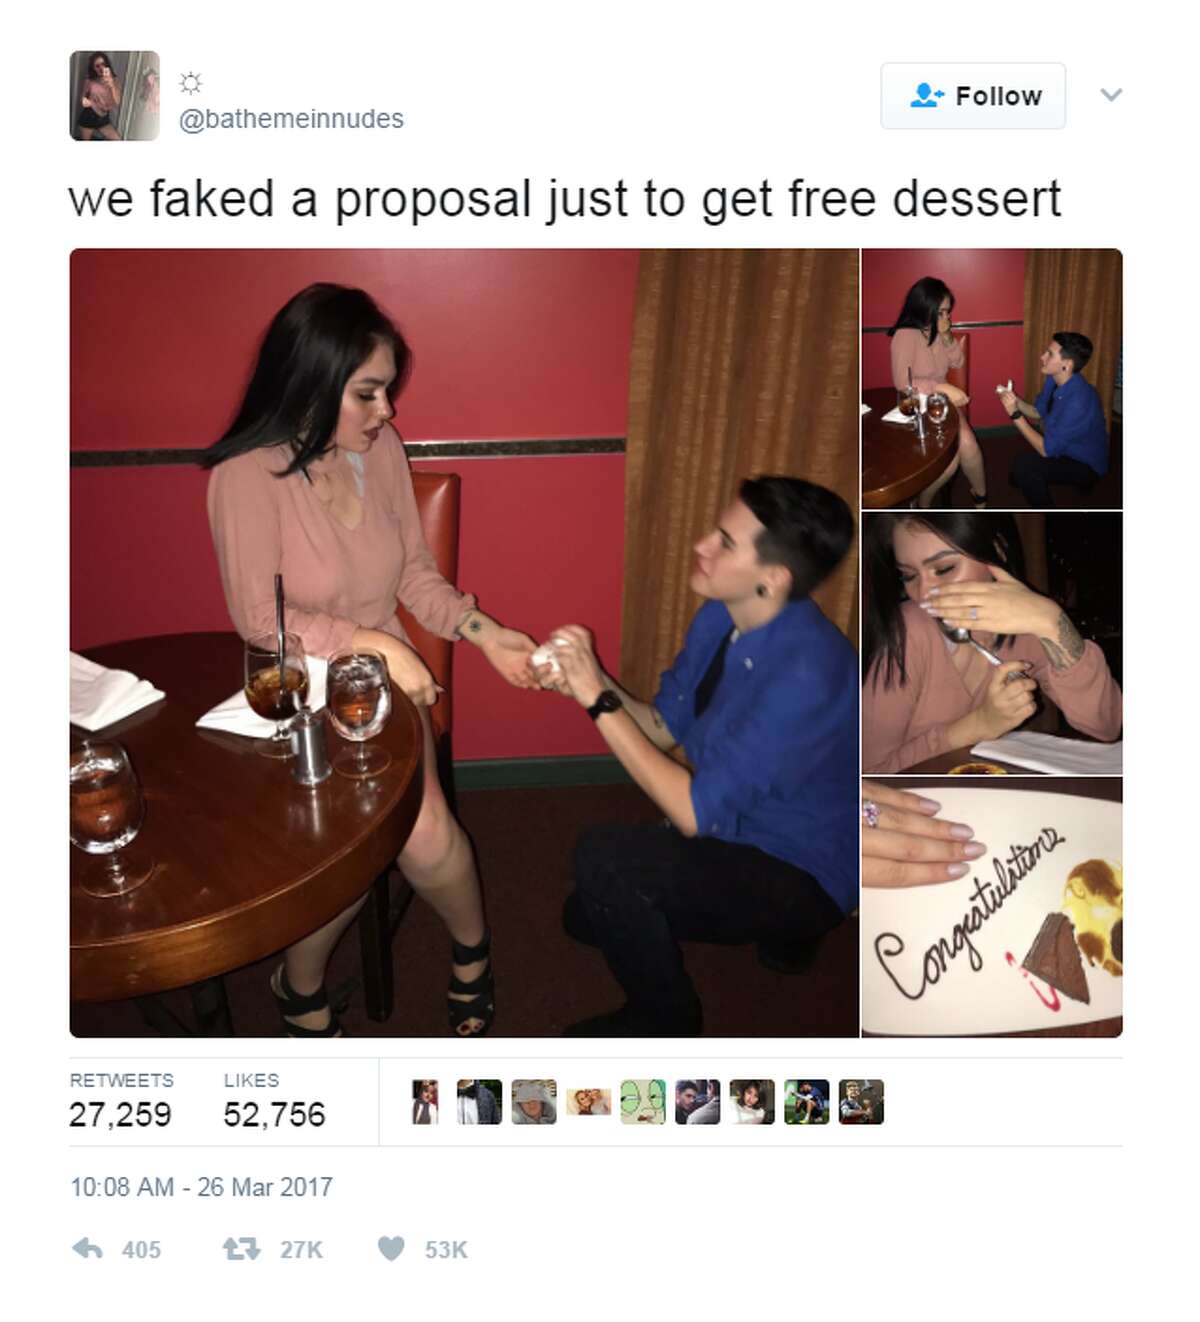 Texas teens fake marriage proposal to get free dessert at fancy restaurant